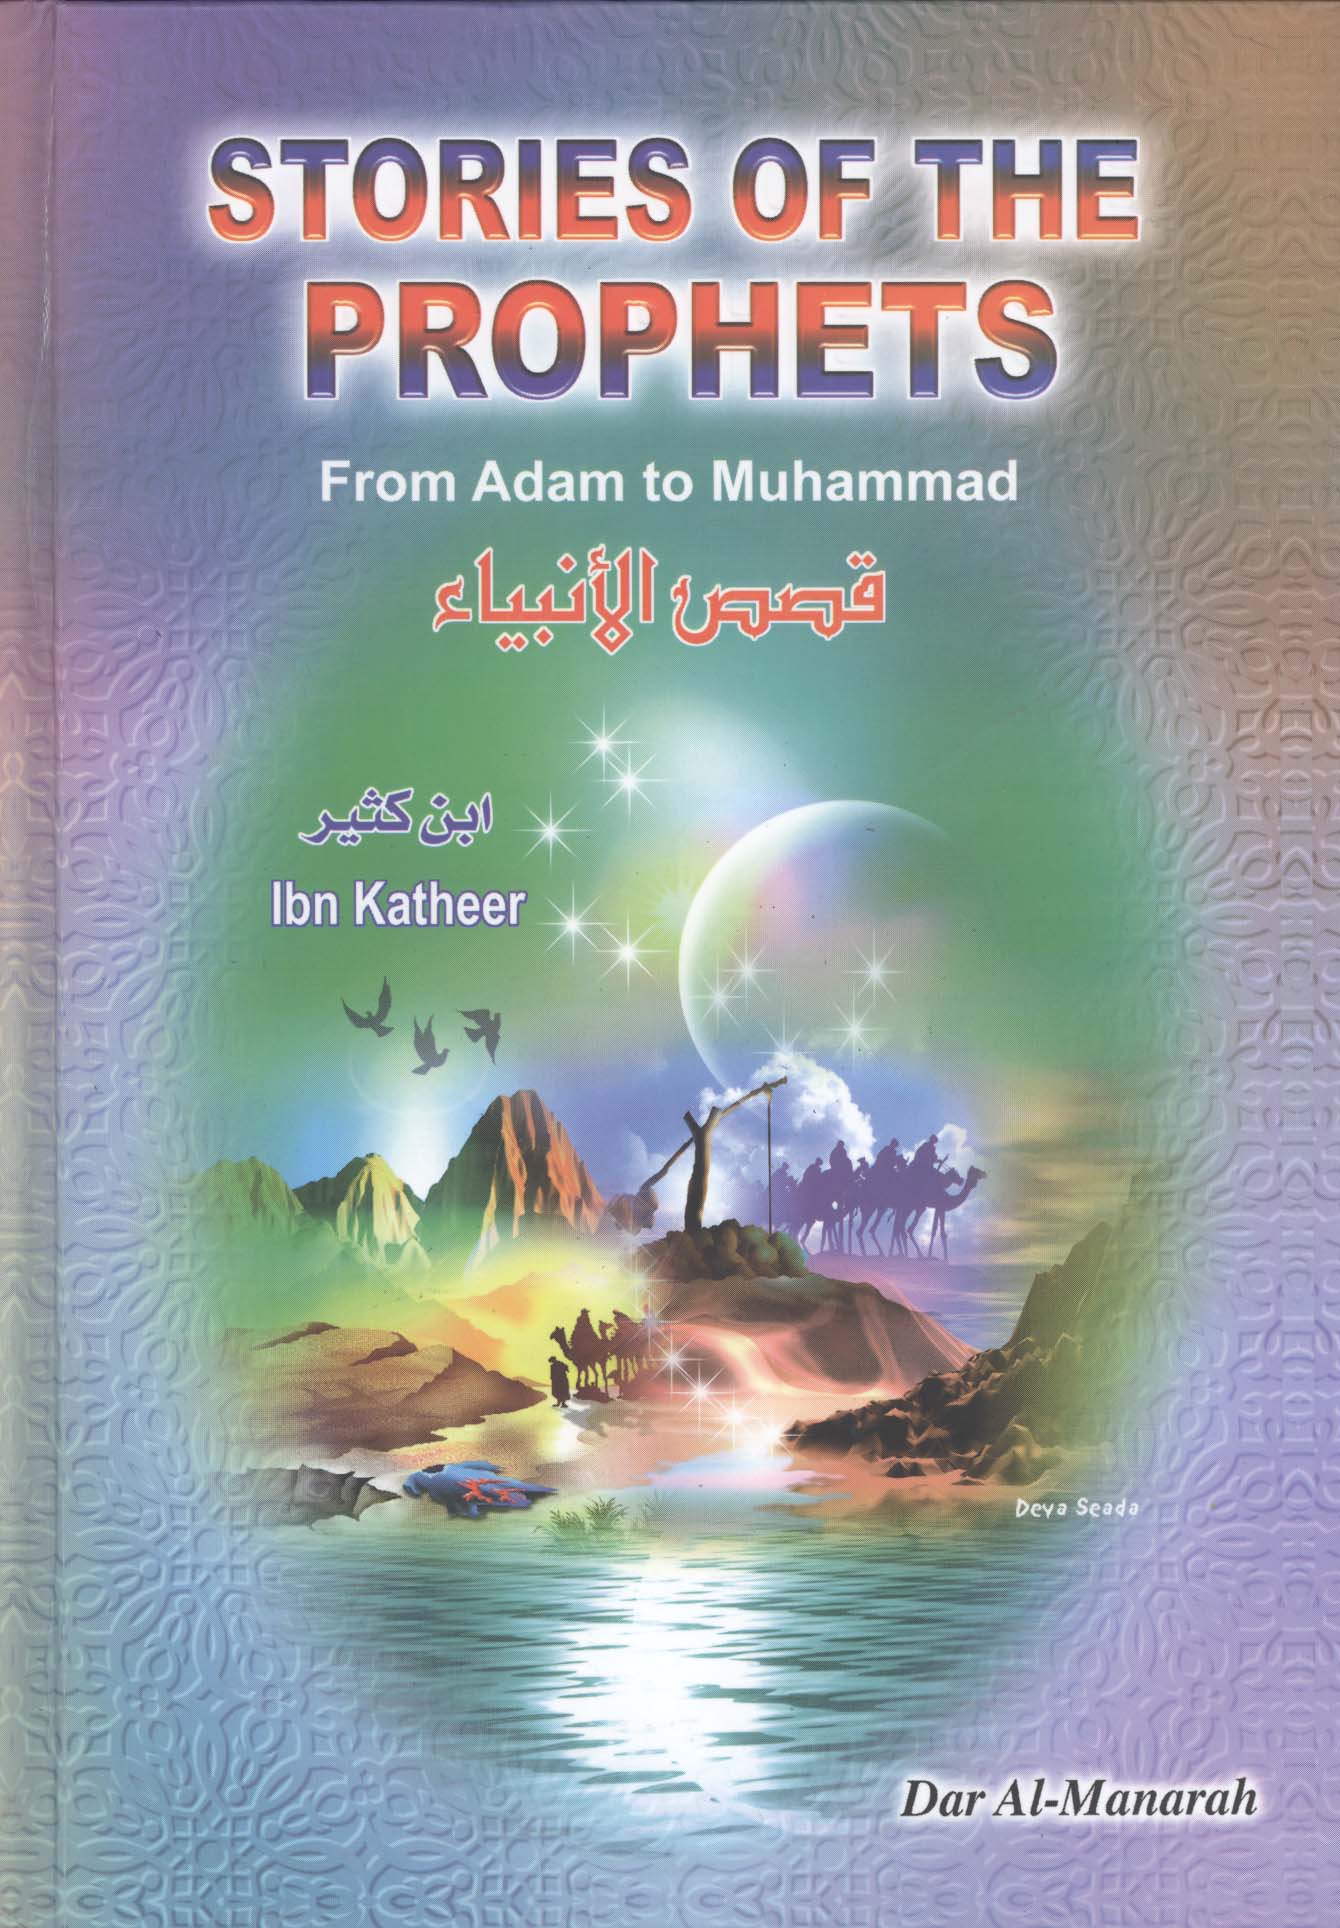 stories of the prophets from adam to muhmmadt "peace be upon them"